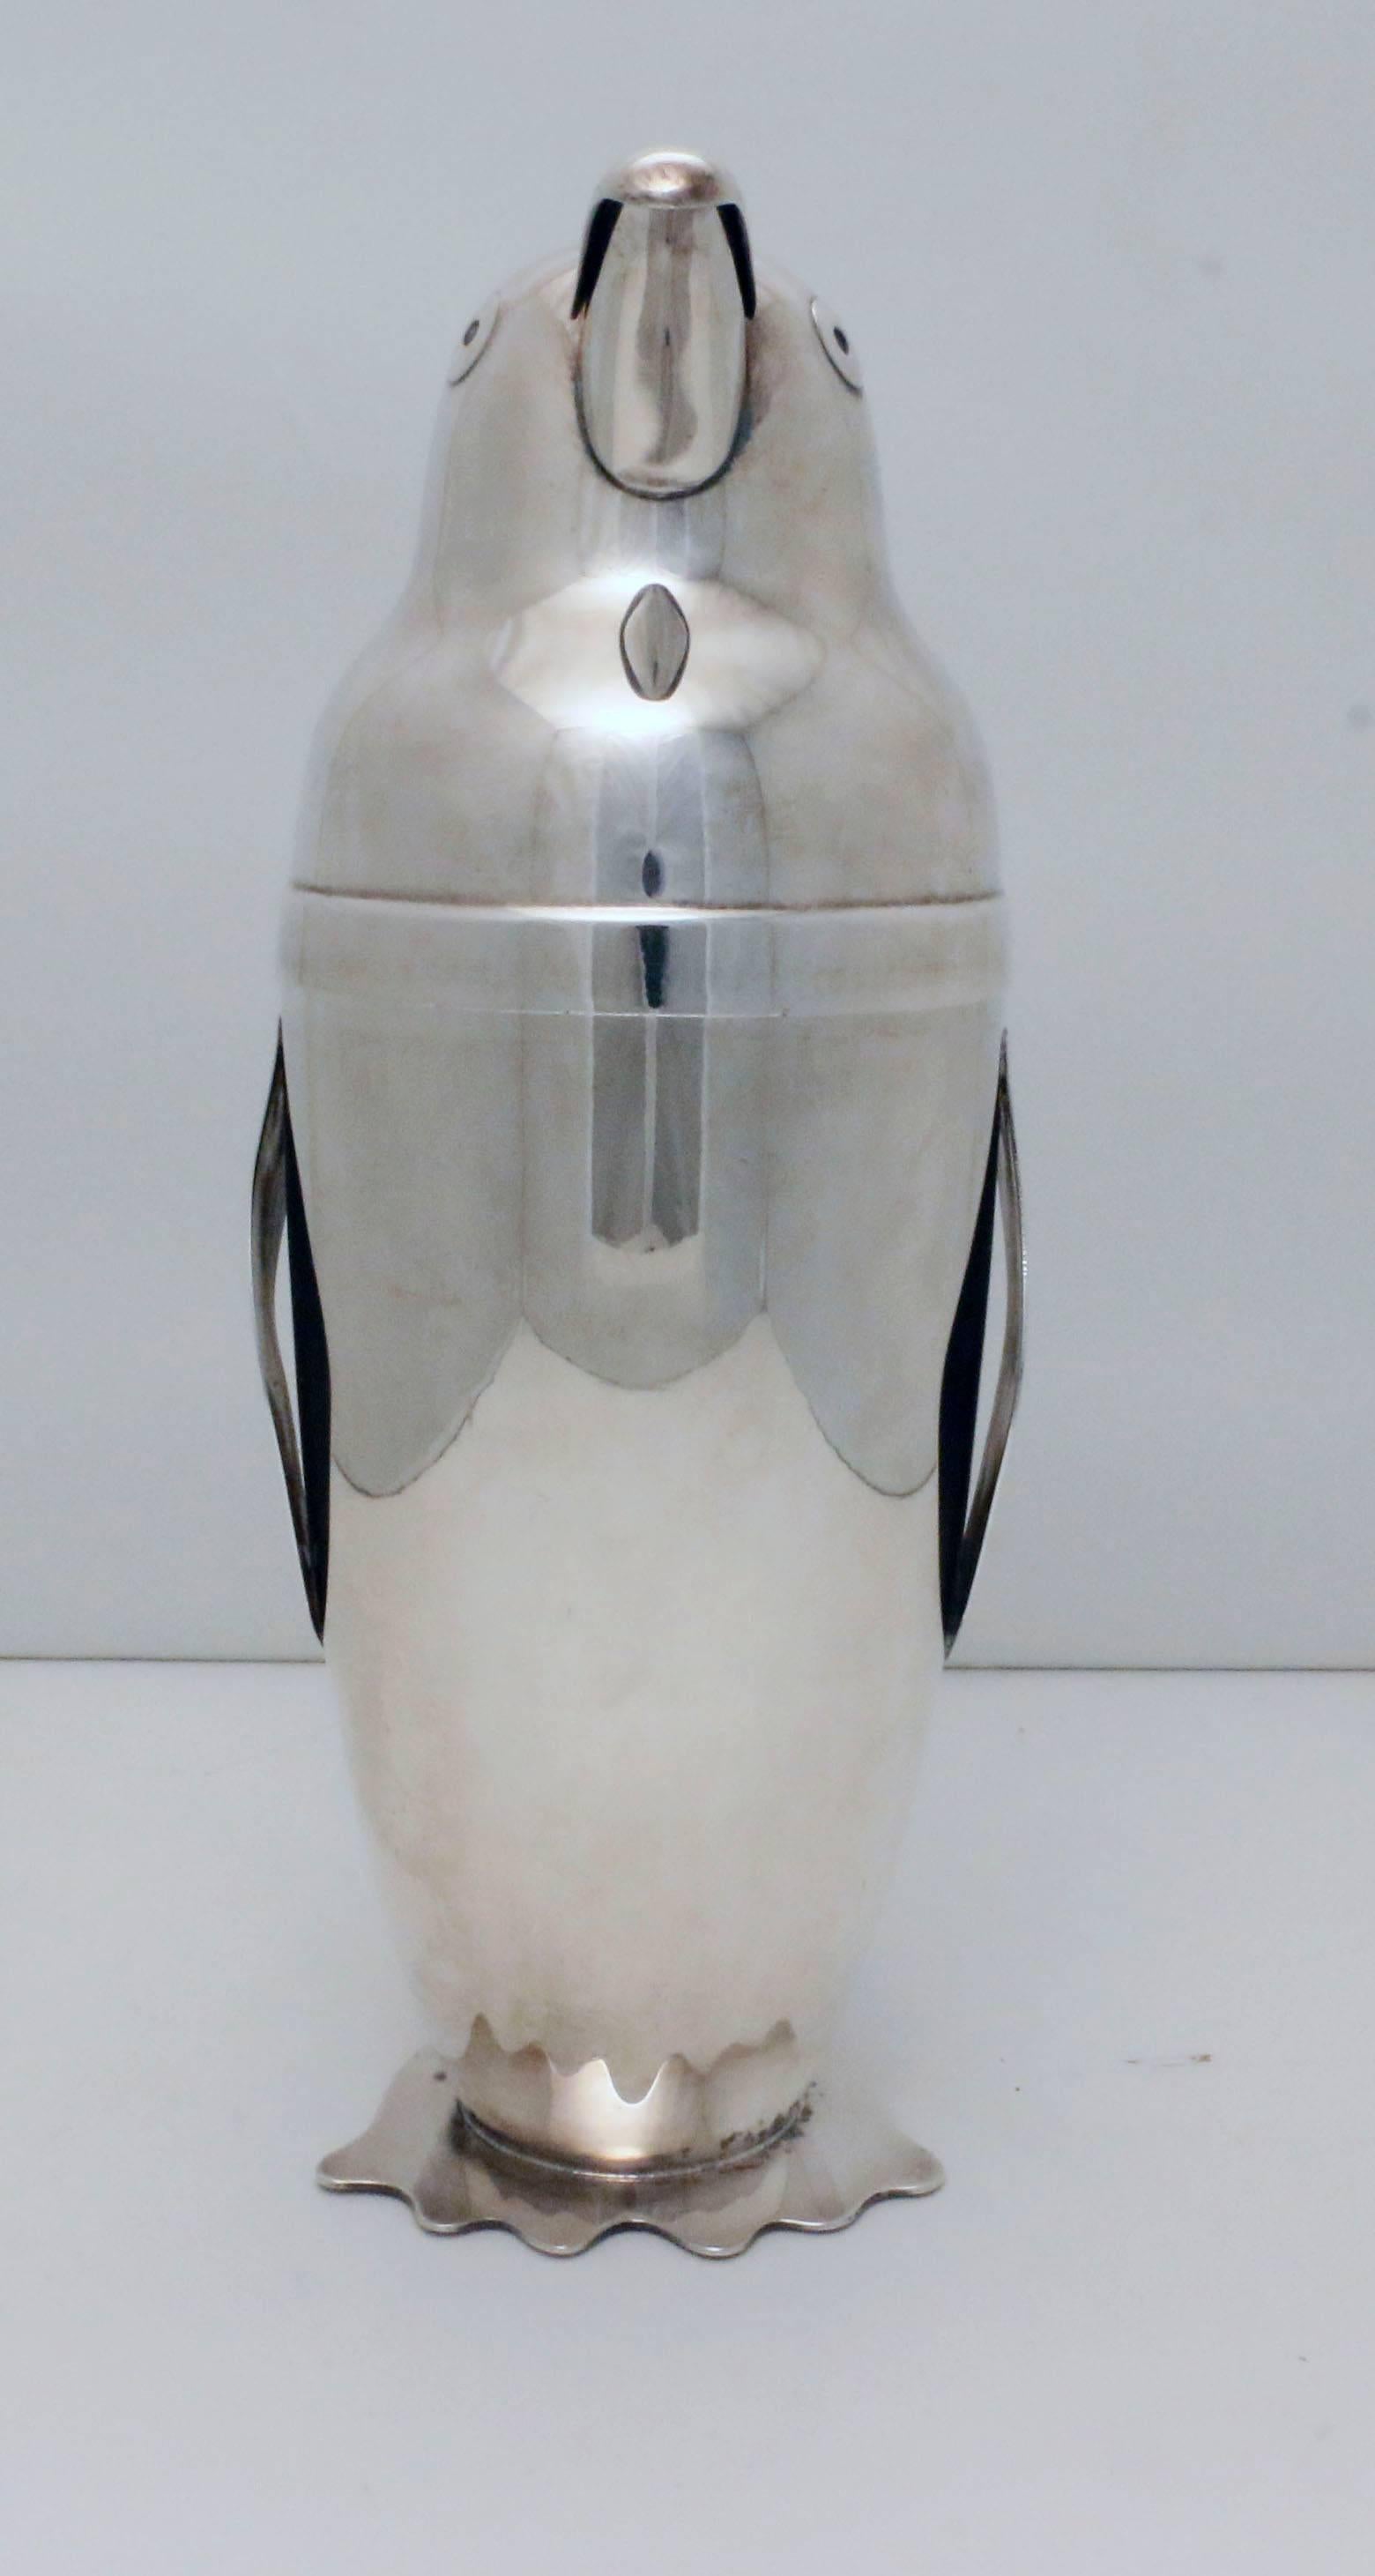 Art Deco silver plate cocktail Shaker designed as a penguin by Emil Schuelke for the Napier Co. of Meridien, Conn.
Stamped Napier to base pat. D-101559.